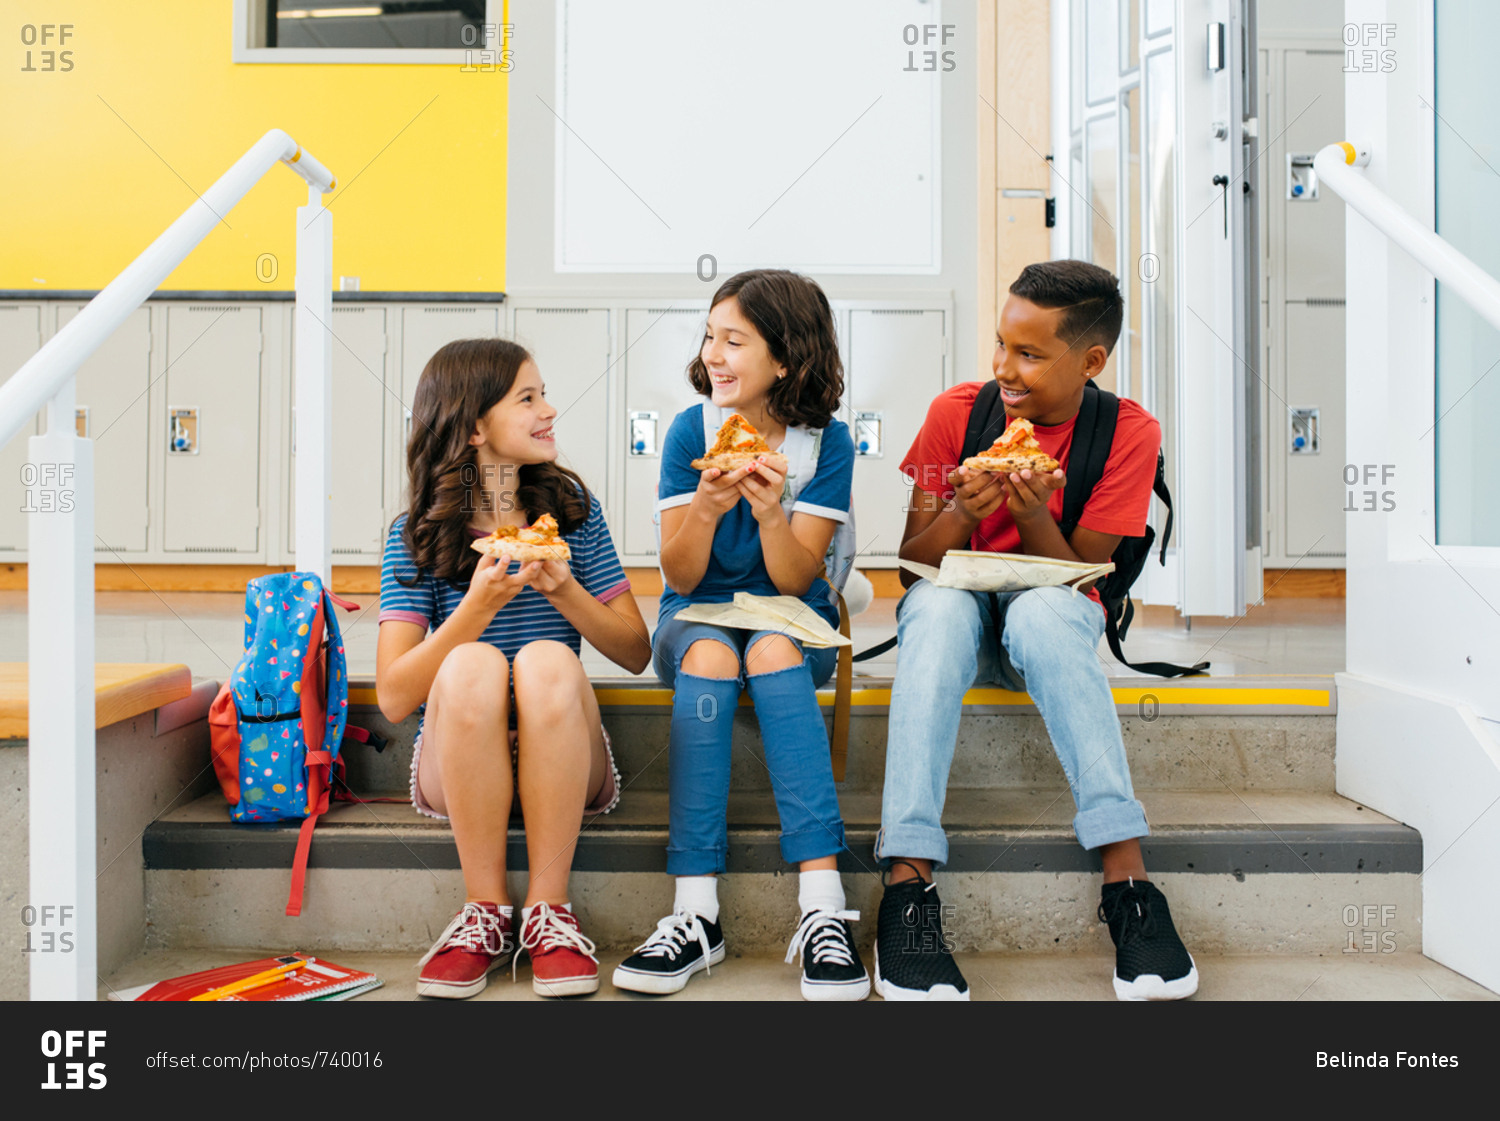 Smiling children sitting on steps looking at each other and eating lunch together at school